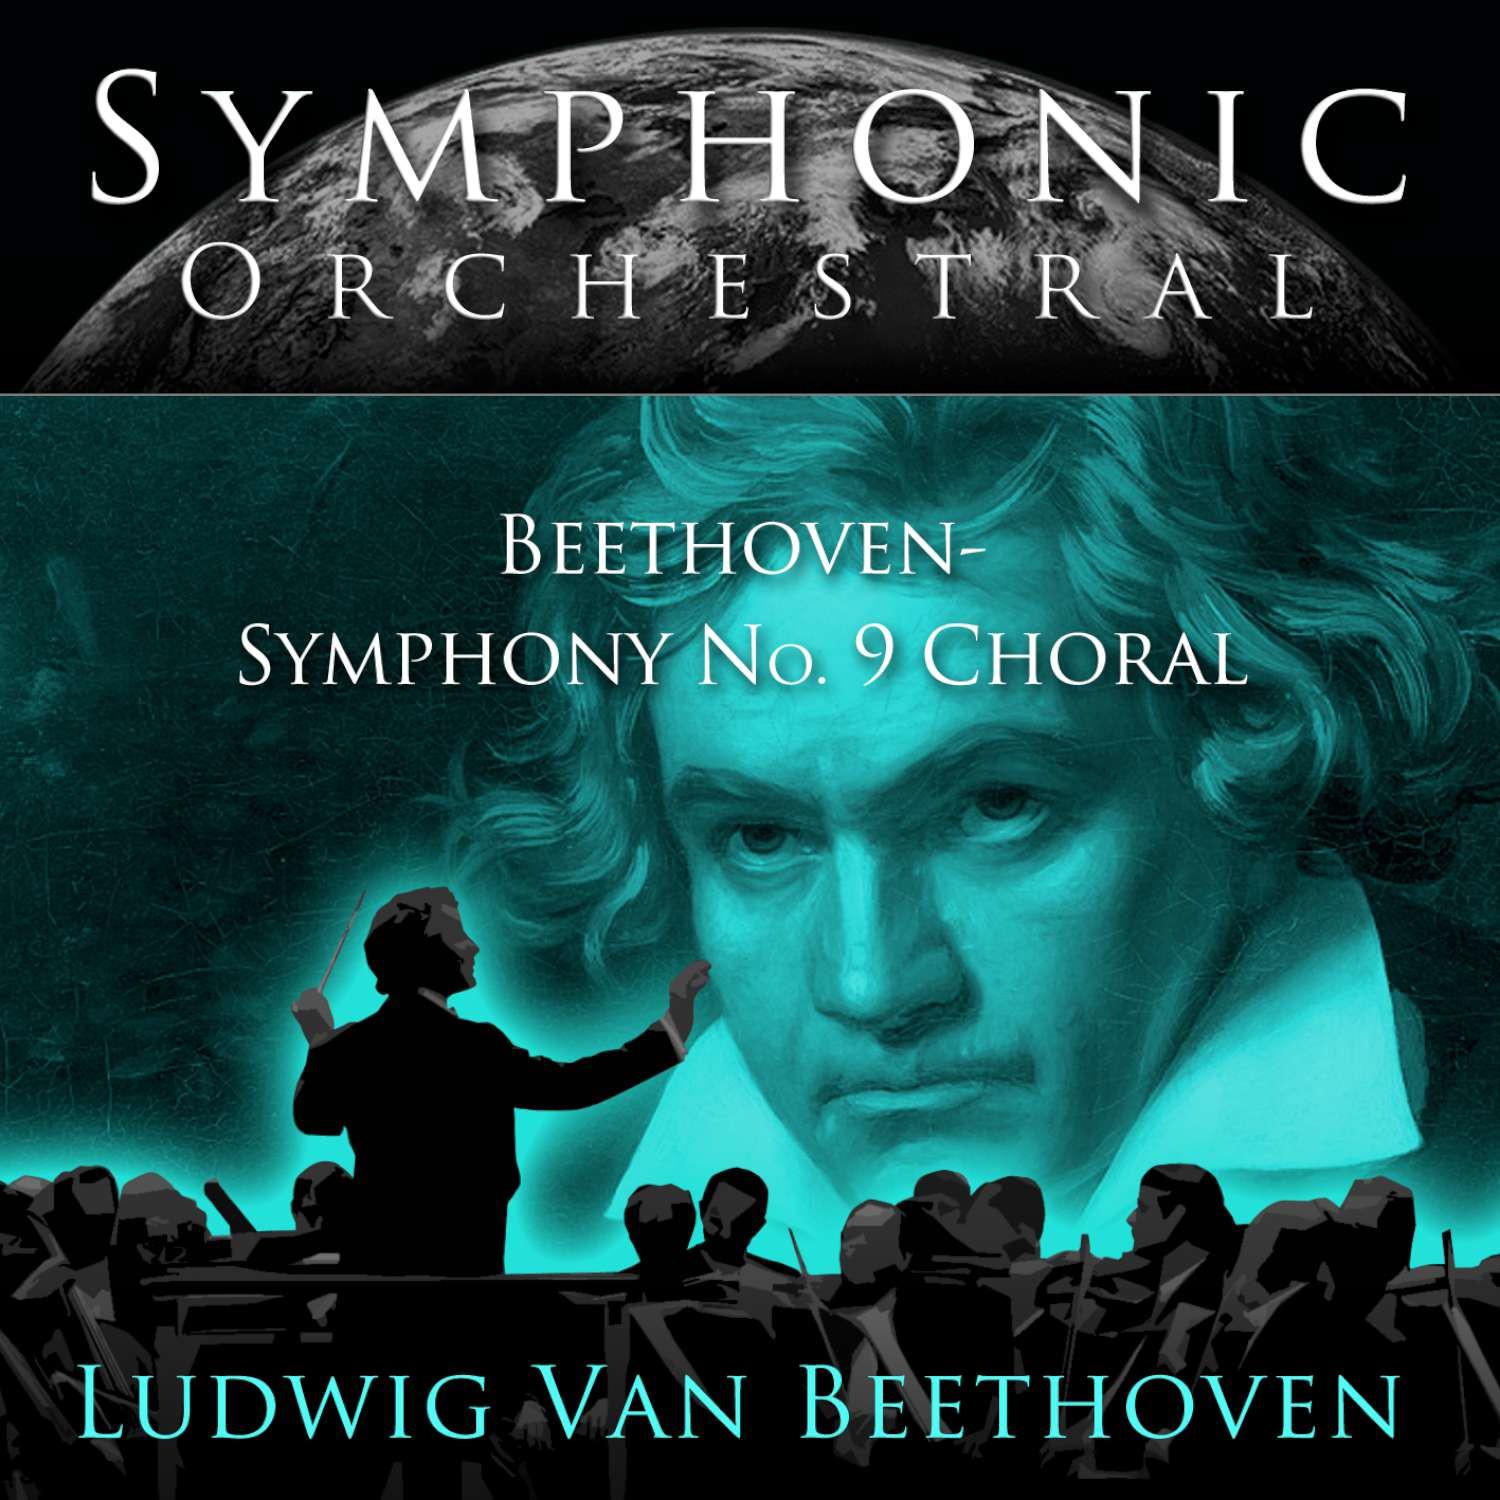 Symphonic Orchestral - Beethoven: Symphony No.9 Choral